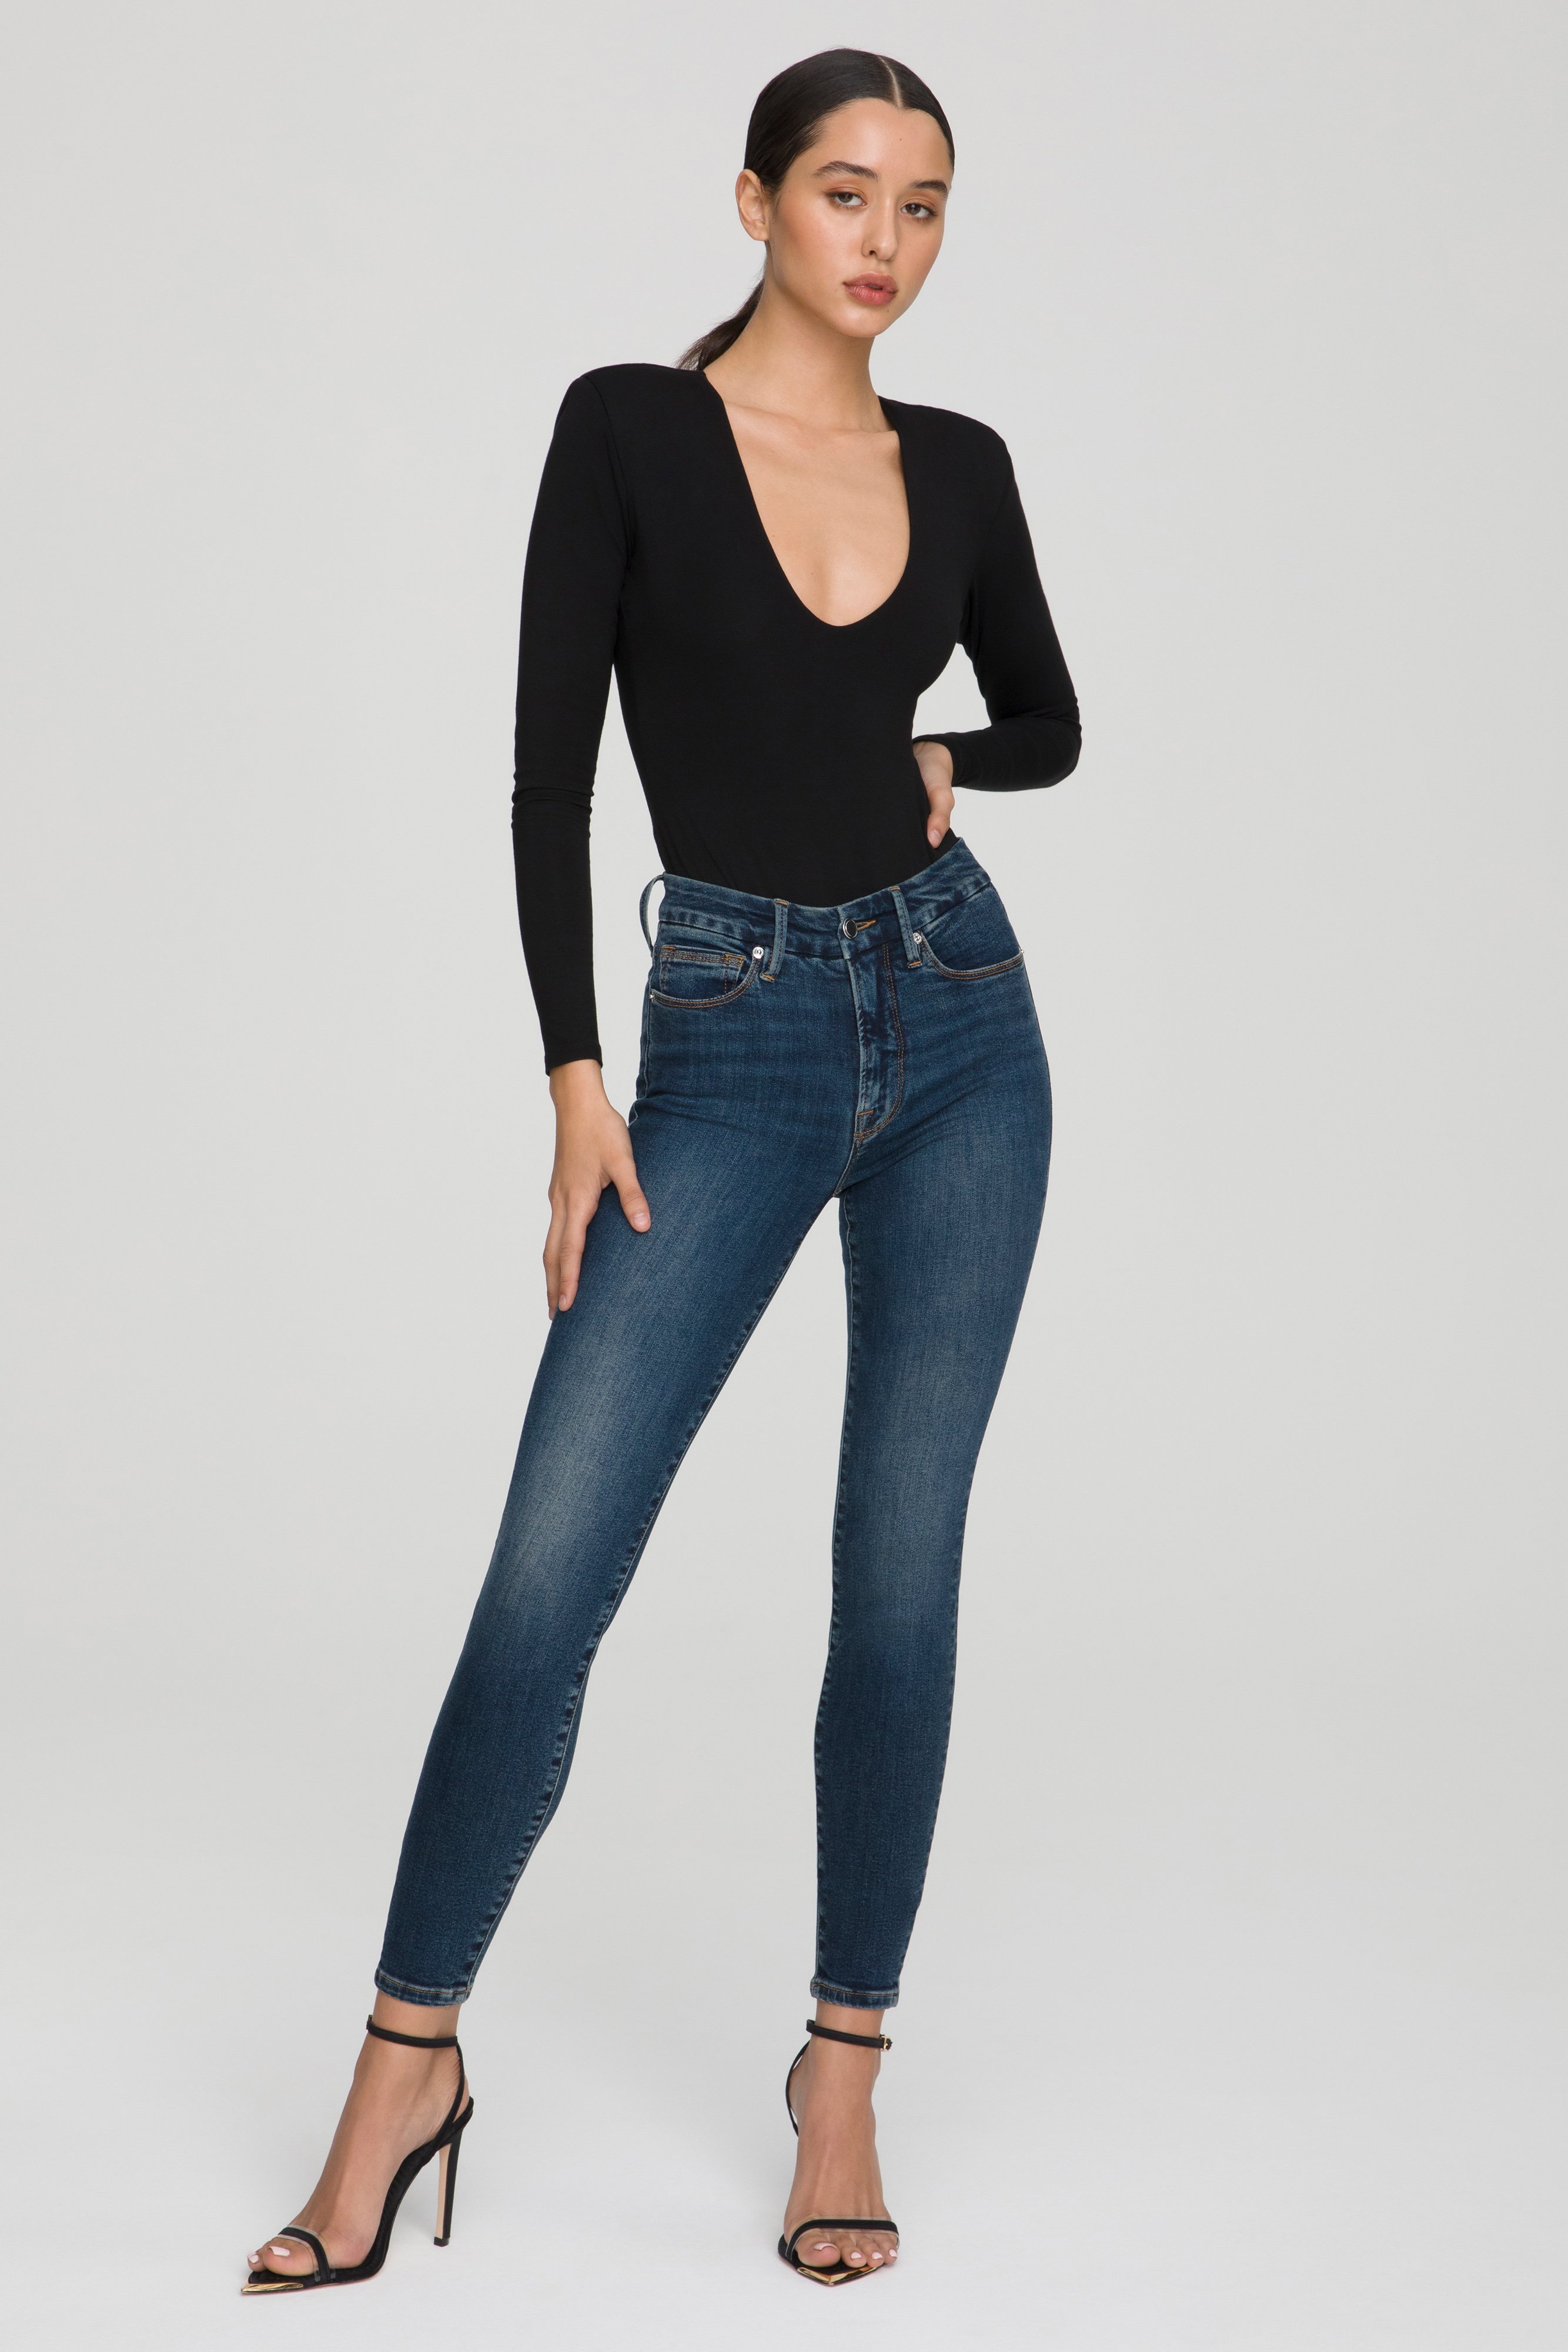 Styled with GOOD LEGS SKINNY JEANS | BLUE609